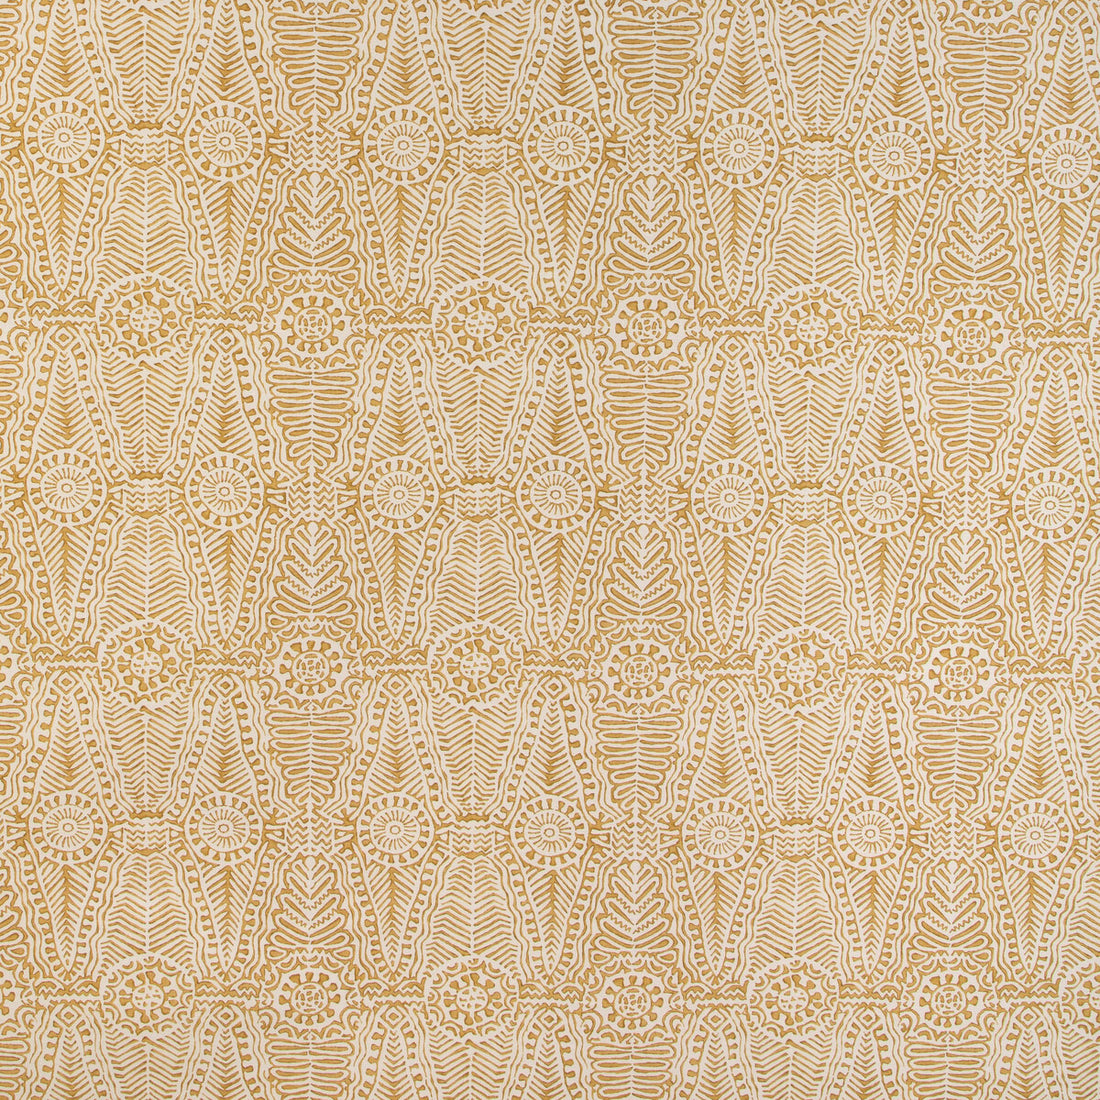 Drayton Print fabric in maize color - pattern 2020184.40.0 - by Lee Jofa in the Clare Prints collection